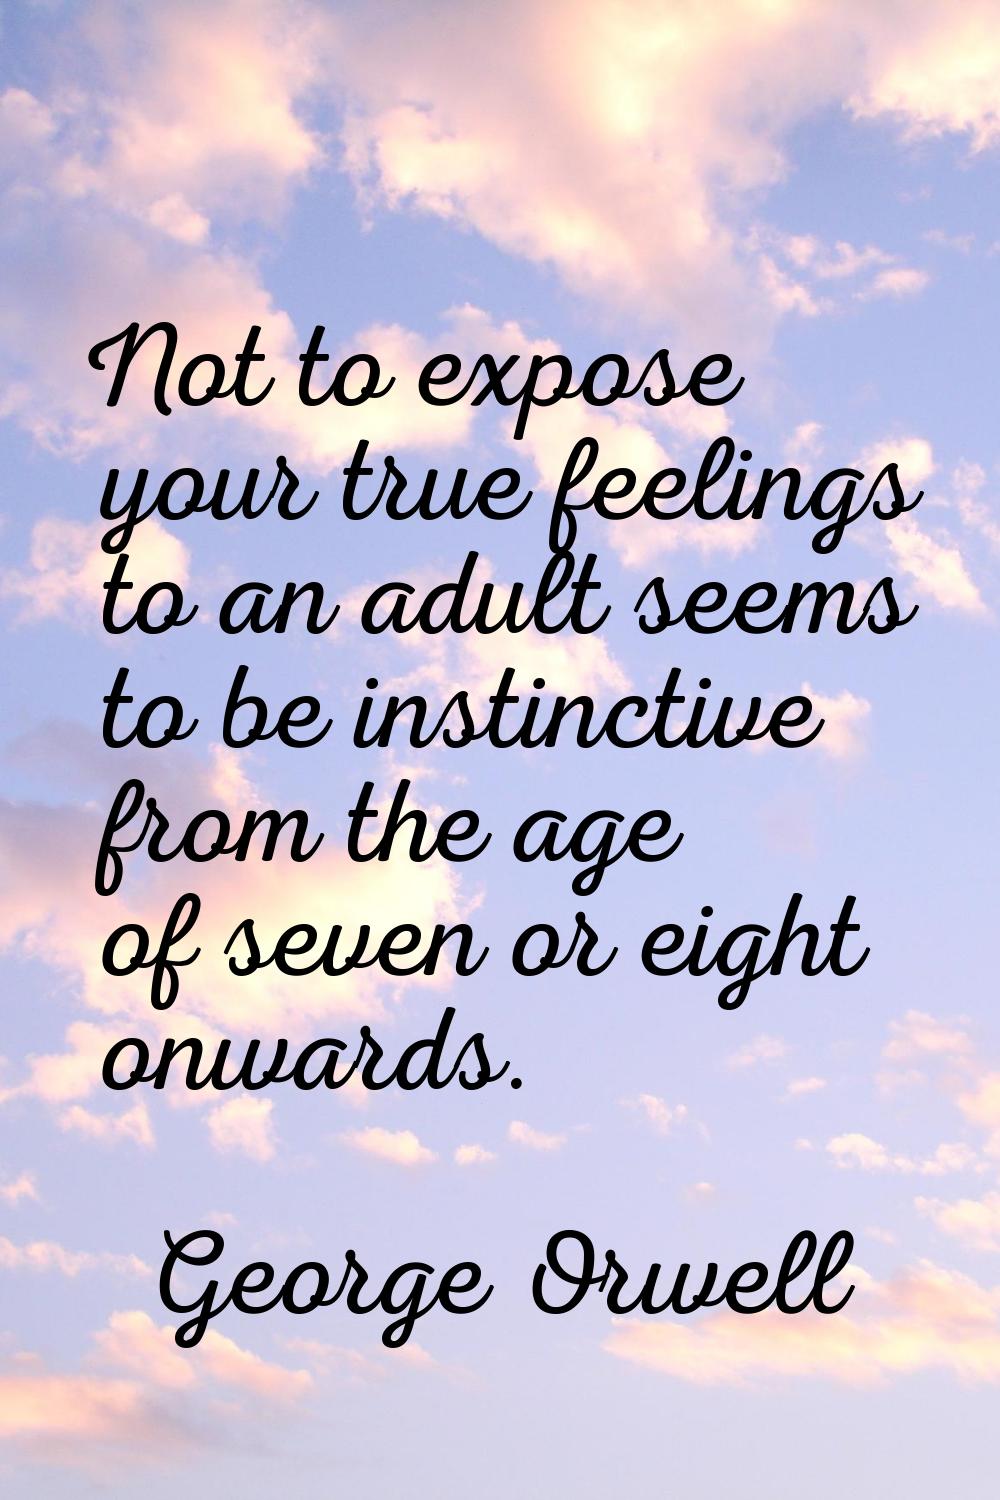 Not to expose your true feelings to an adult seems to be instinctive from the age of seven or eight